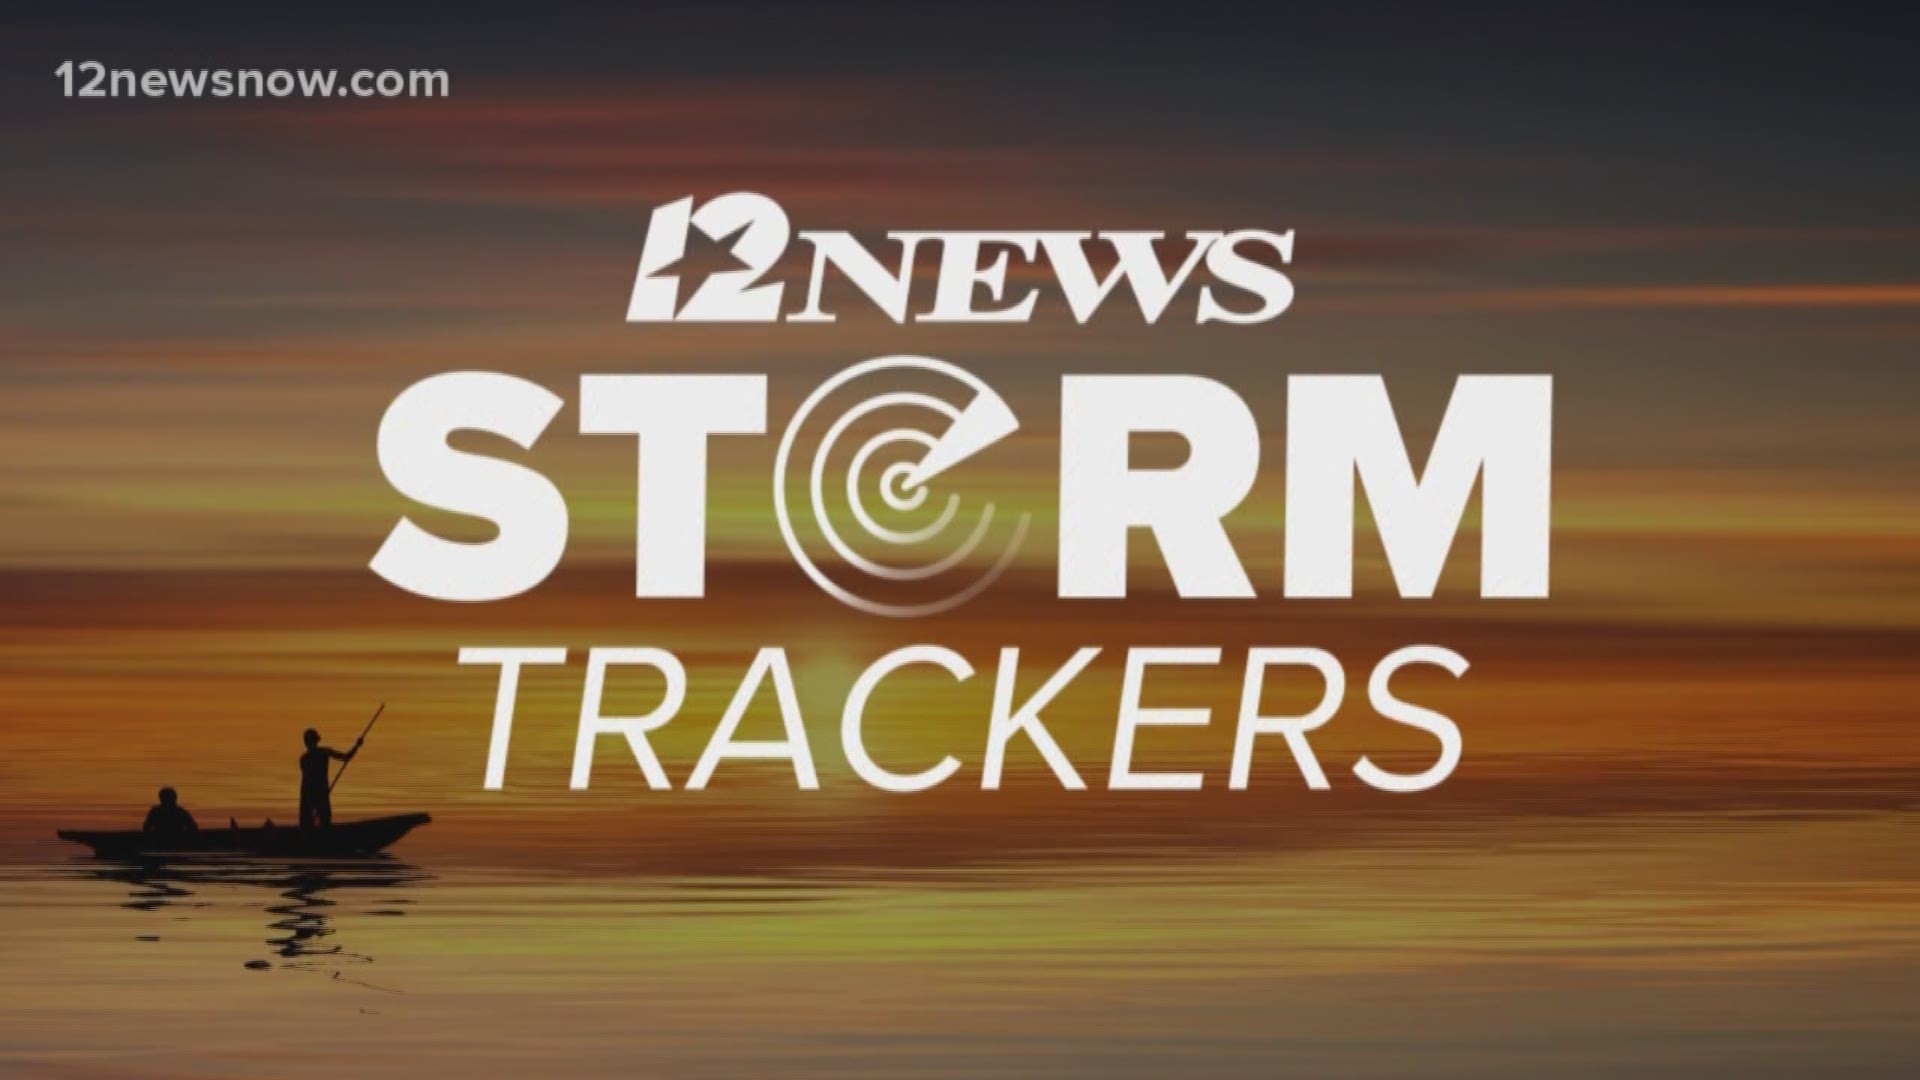 12News StormTrackers are monitoring the threat for damaging winds and an isolated tornado as cold front moves through the area.